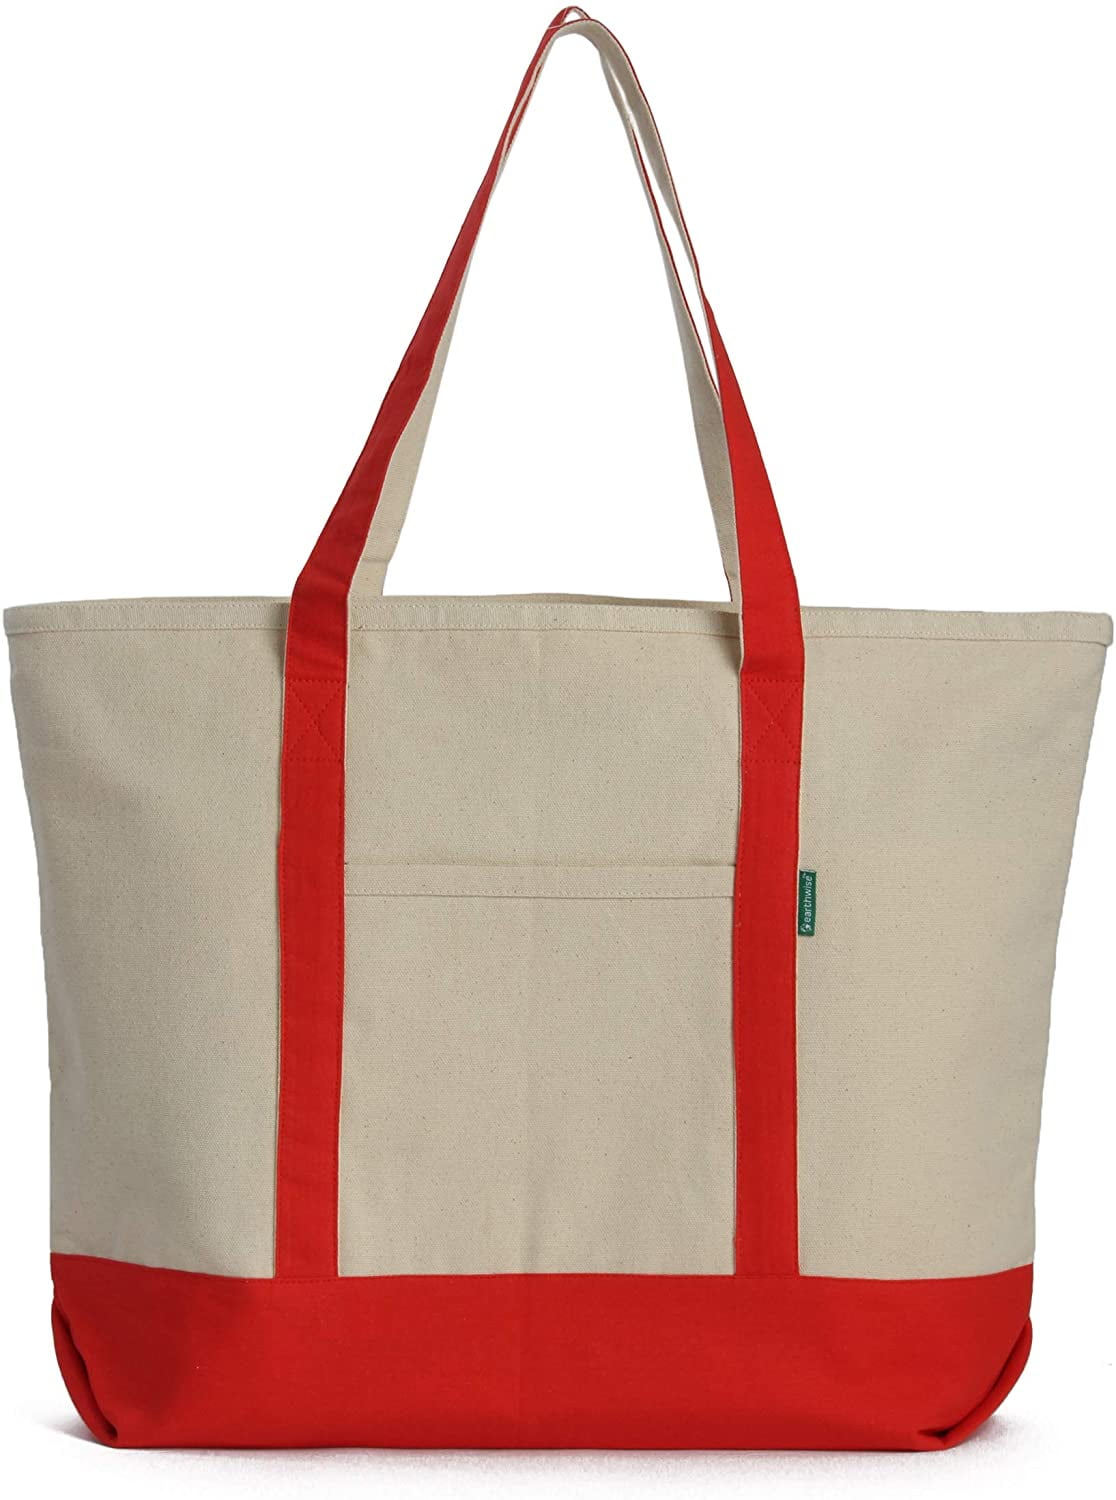 Heavy Duty Cotton Canvas Tote Bag Women's for Grocery, Shopping, Book